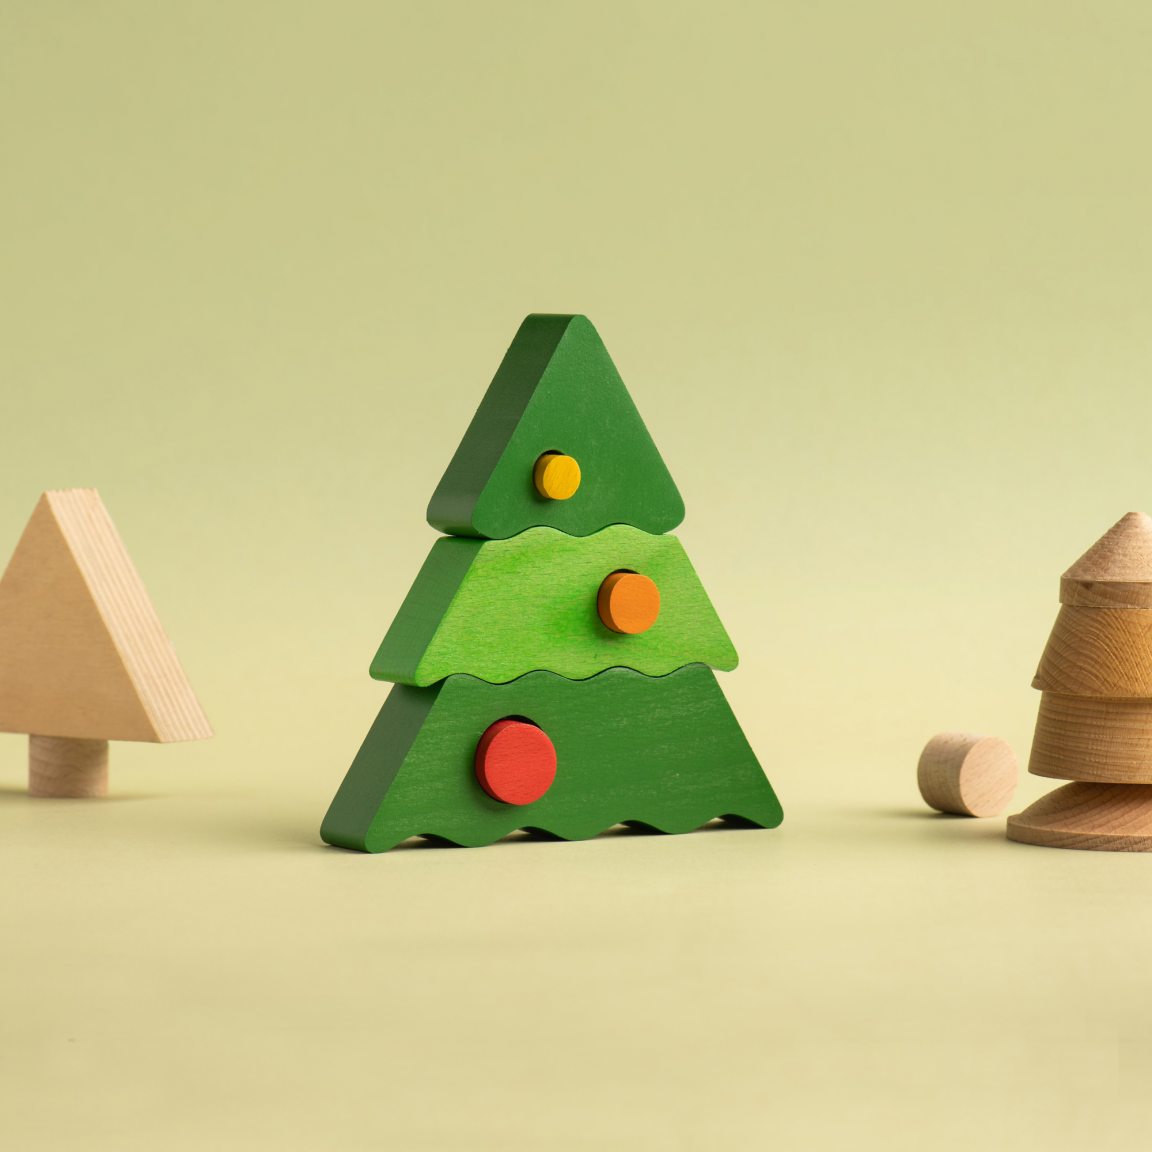 Small stacking toy "Christmas tree"